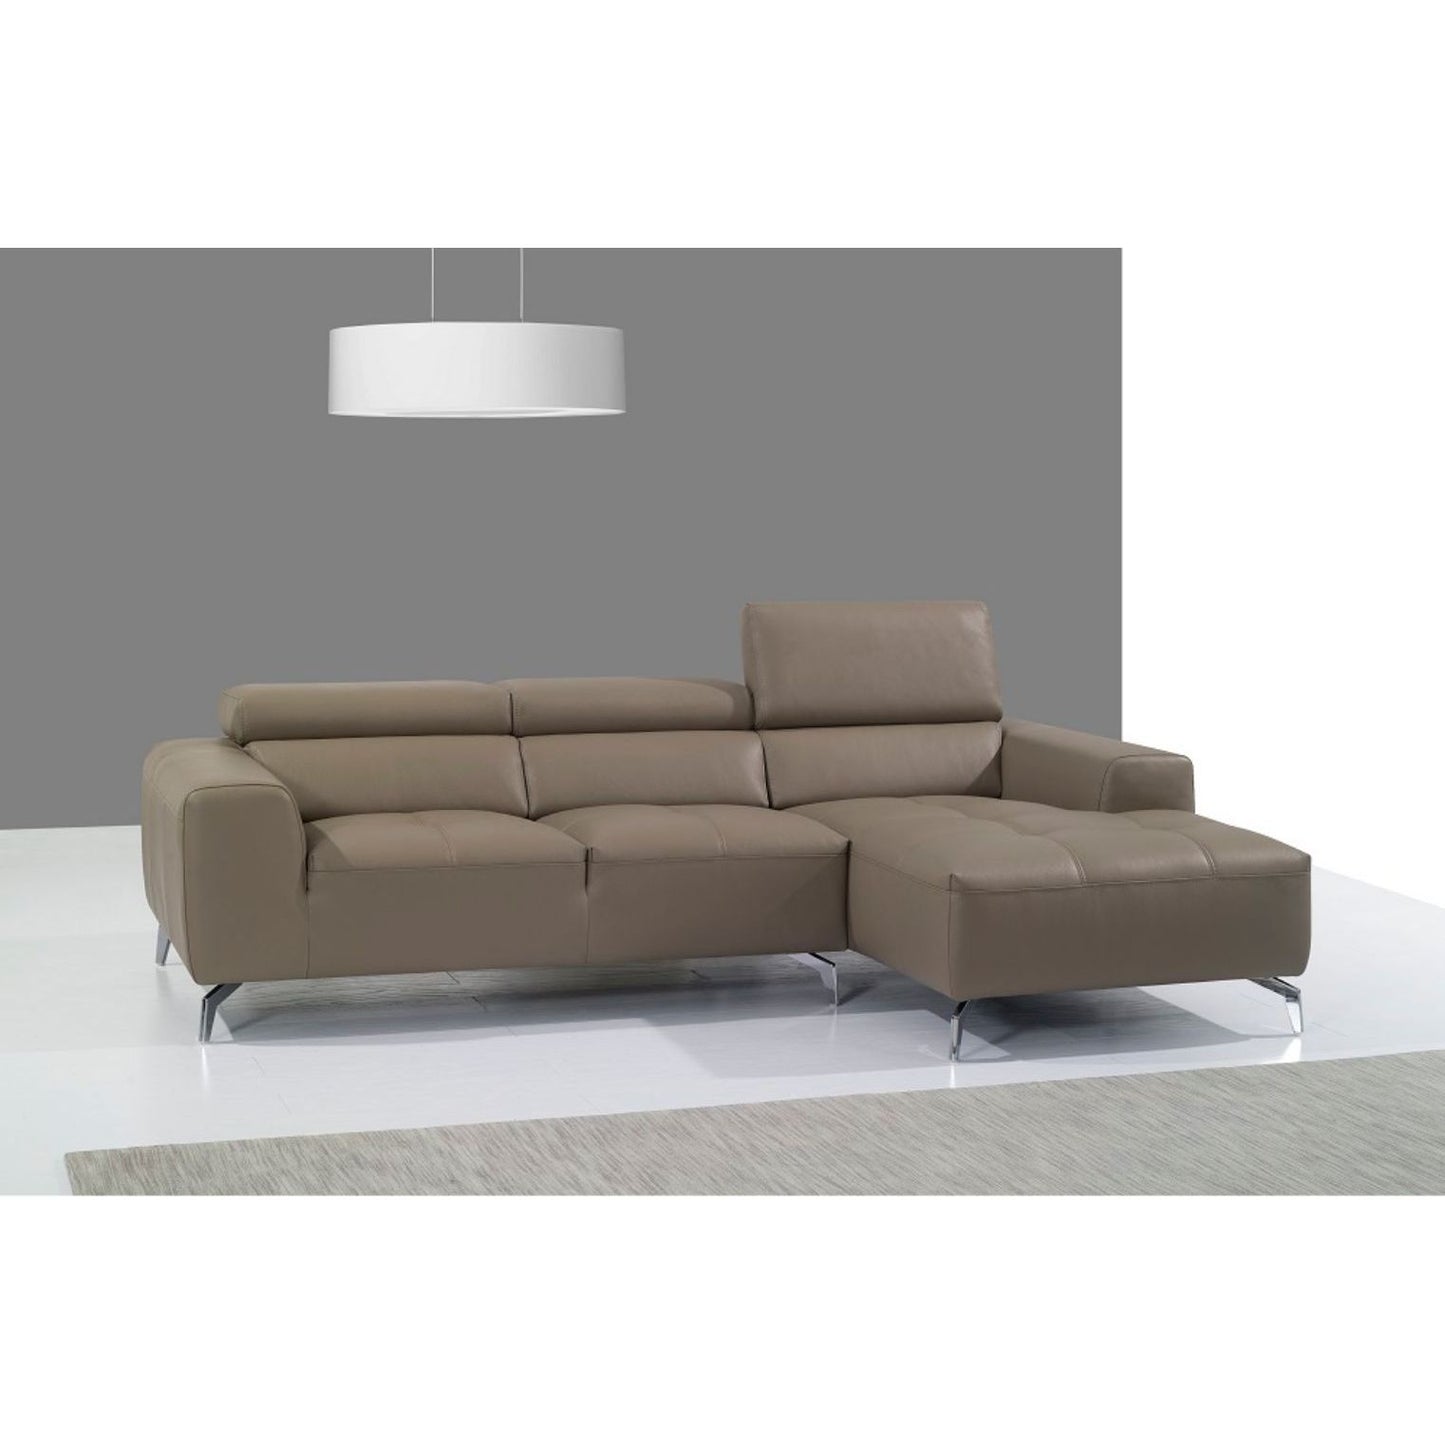 A978B Italian Leather Sectional Right Facing Chaise in Burlywood jnmfurniture Sectionals 17906121-RHFC